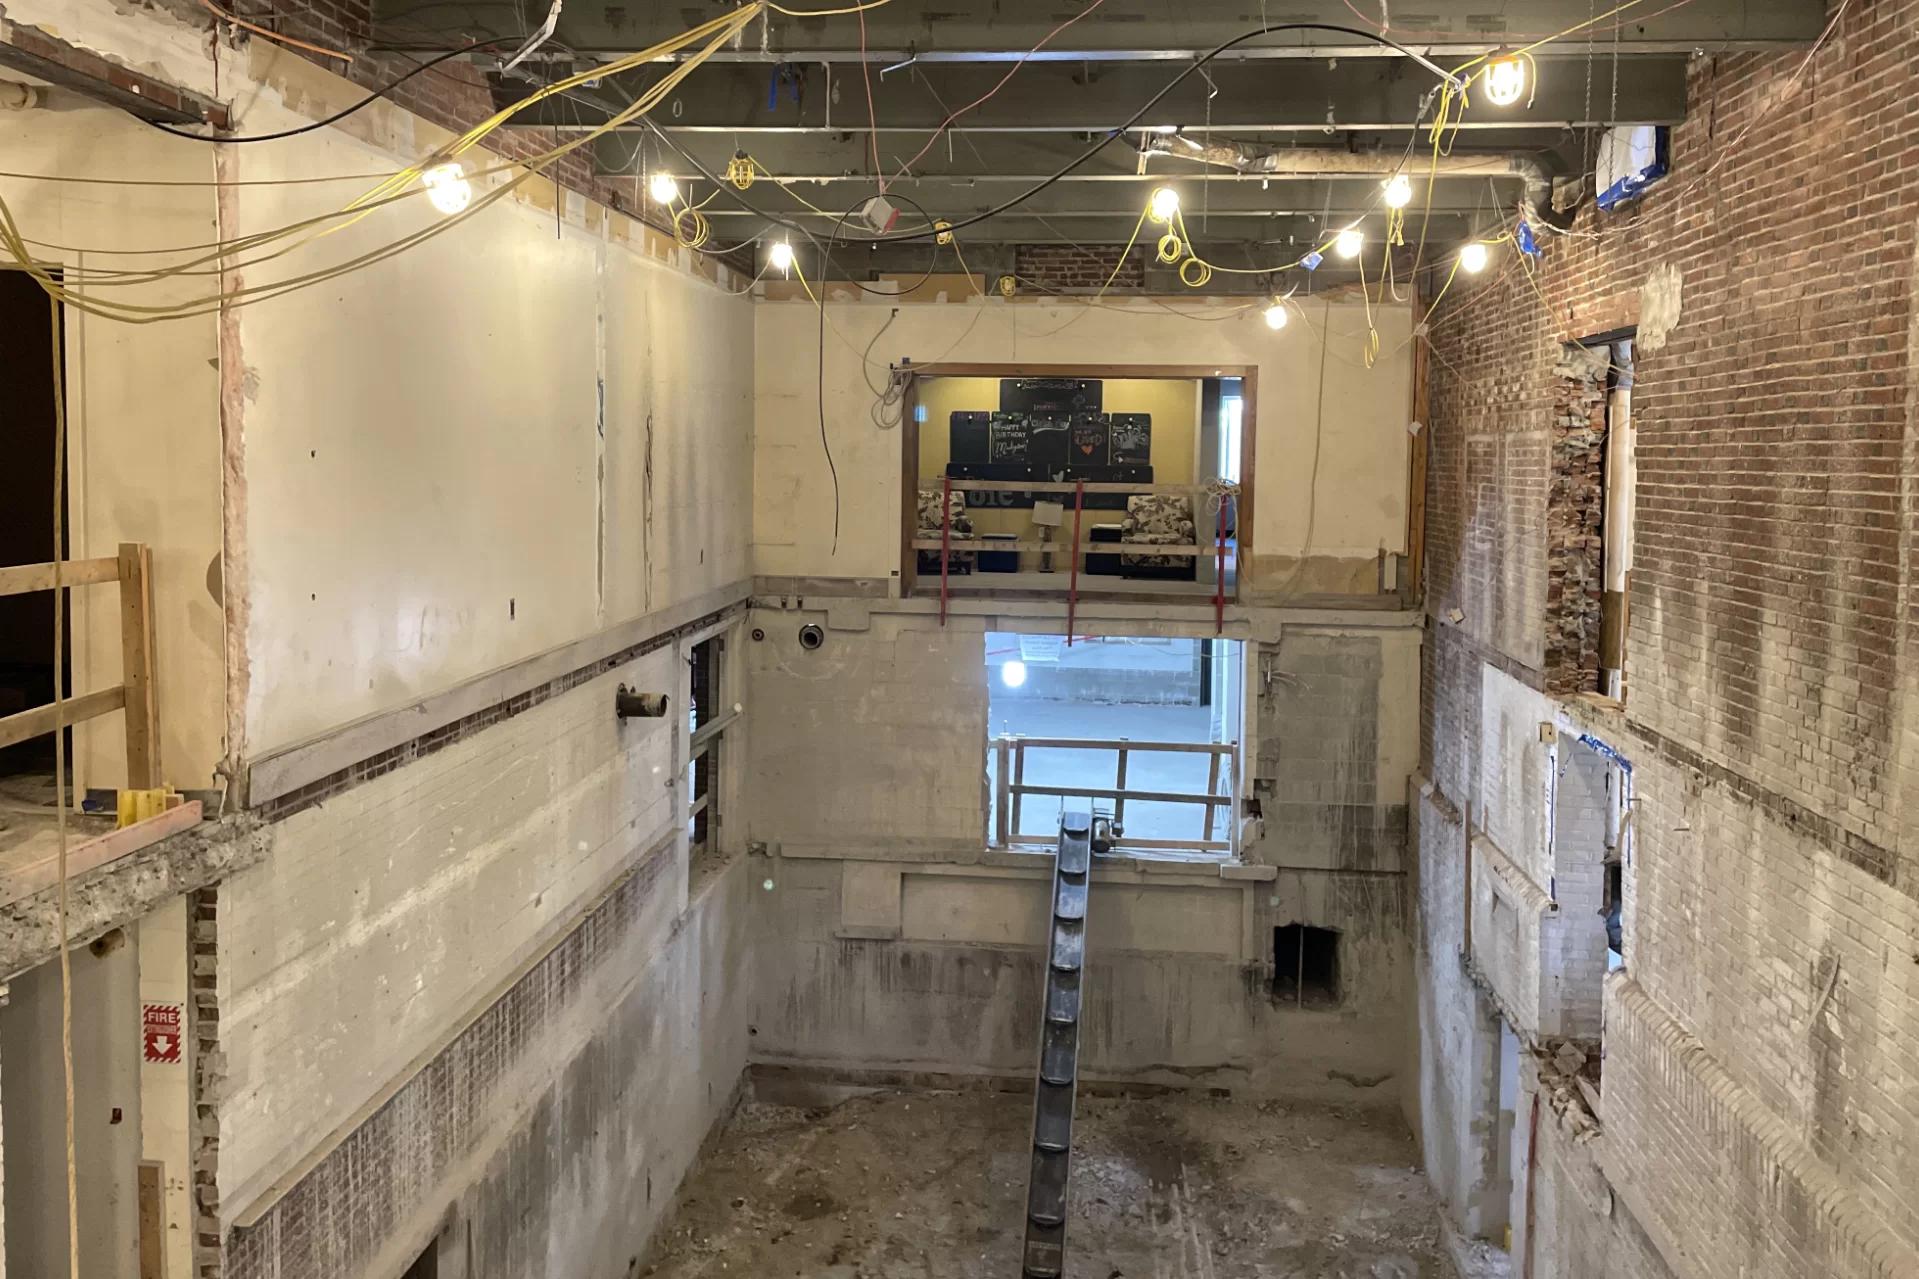 This Sept. 16 image shows the void left by the removal of two concrete floor slabs in Chase Hall. The reception area for the Office of Intercultural Education appears slightly above center. (Courtesy of Consigli Construction)